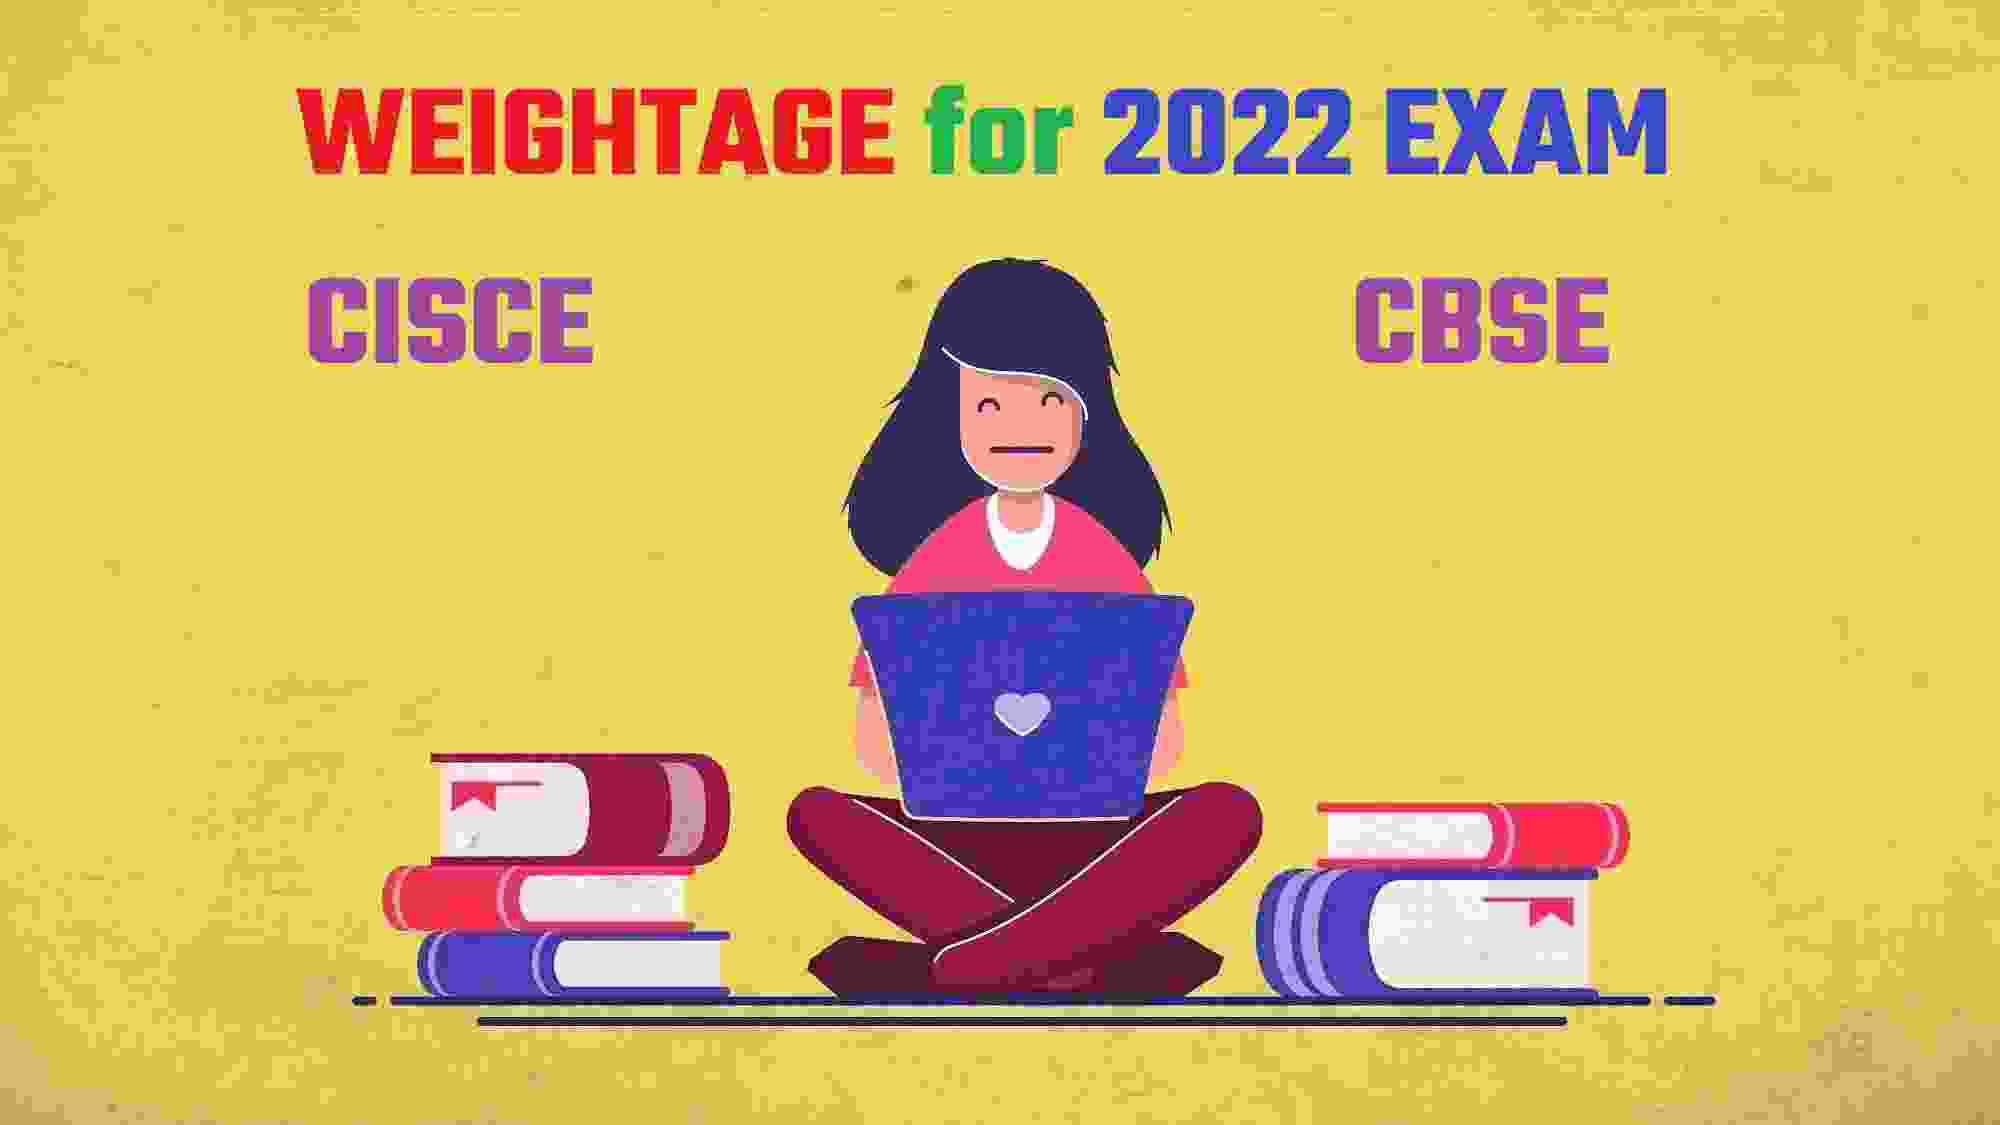 CISCE Weightage 2022 Suspense and Silence Continuously for ICSE ISC